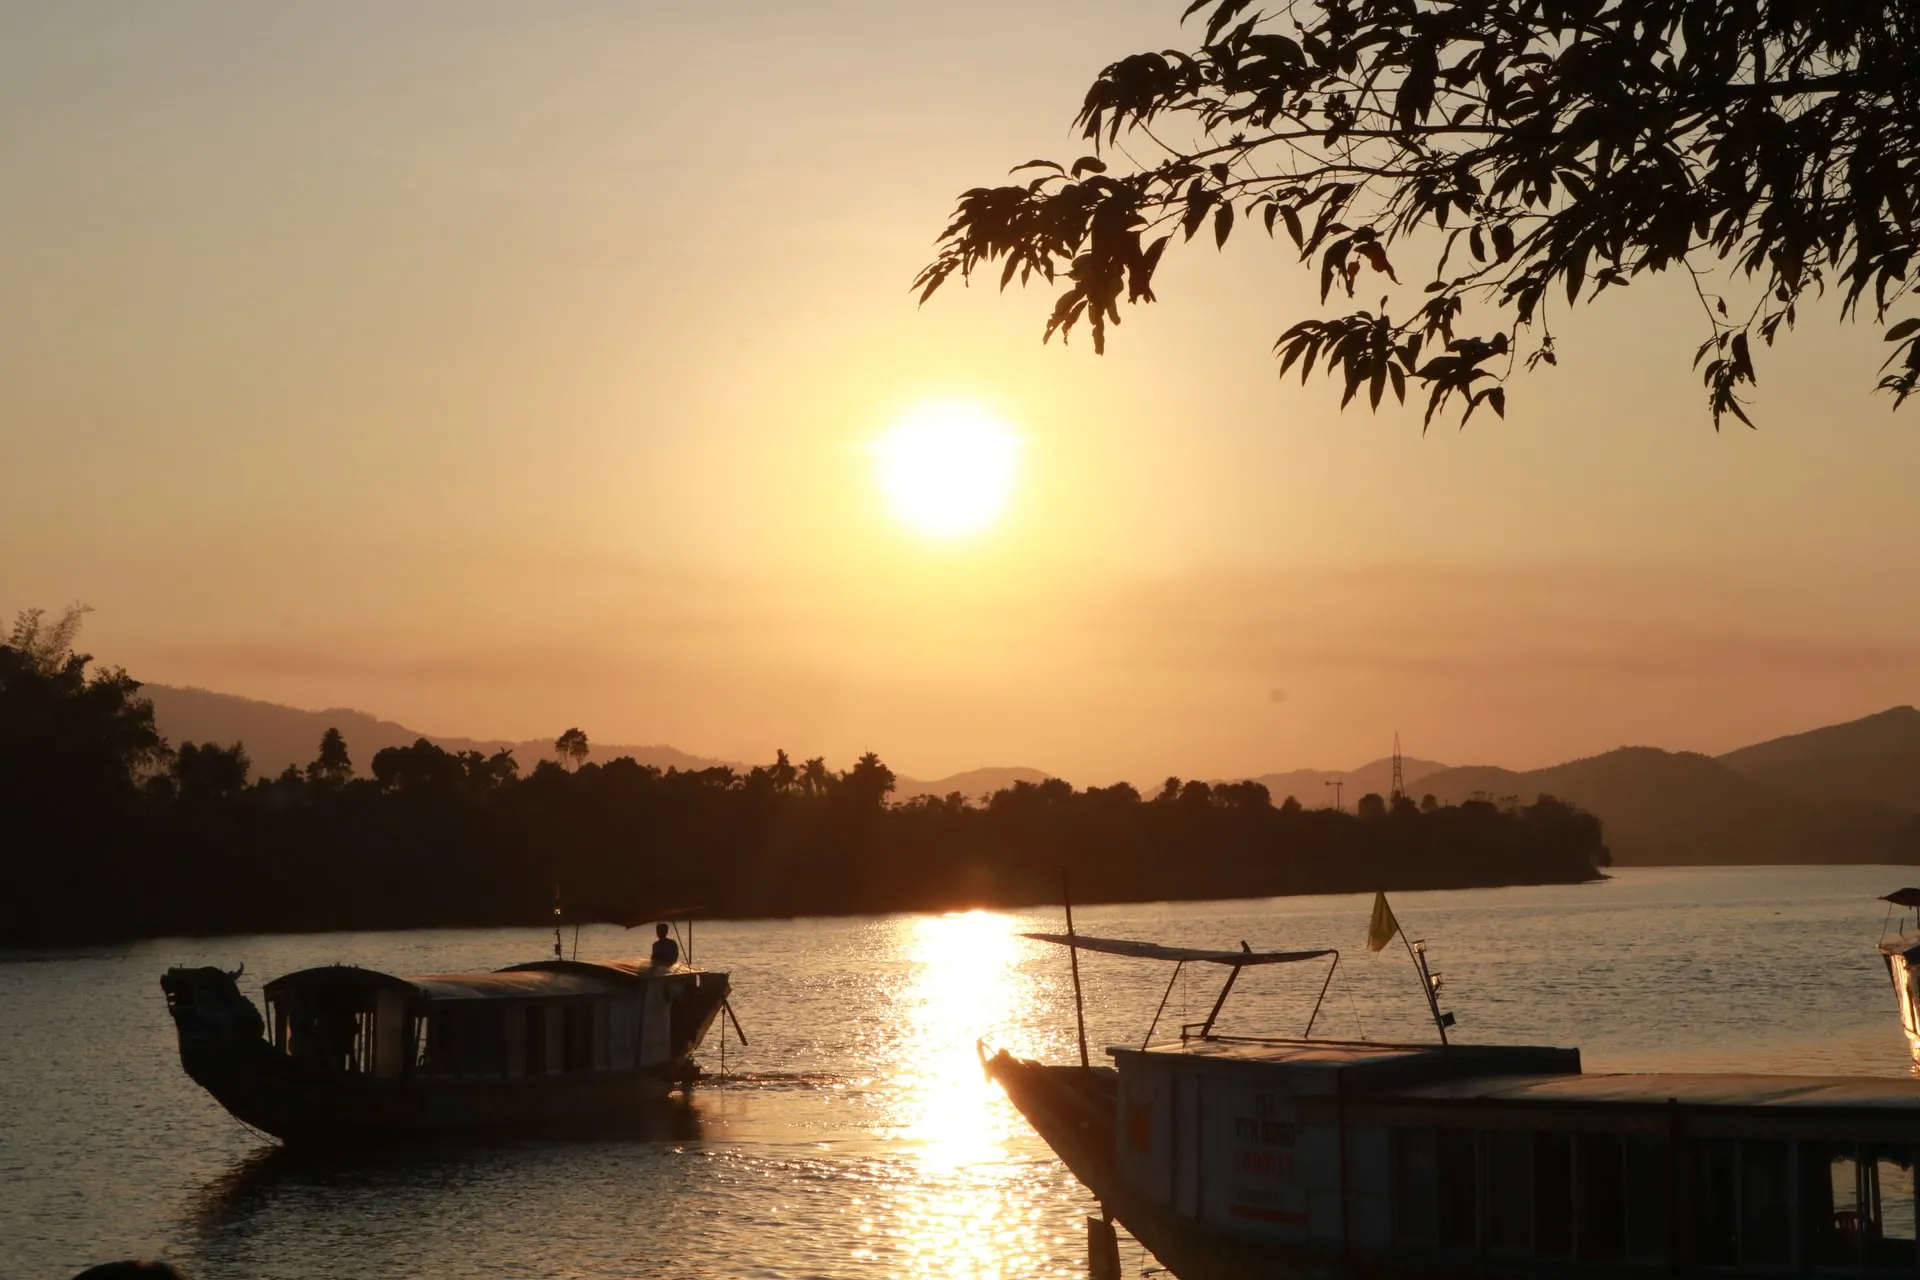 Perfume River during sunset